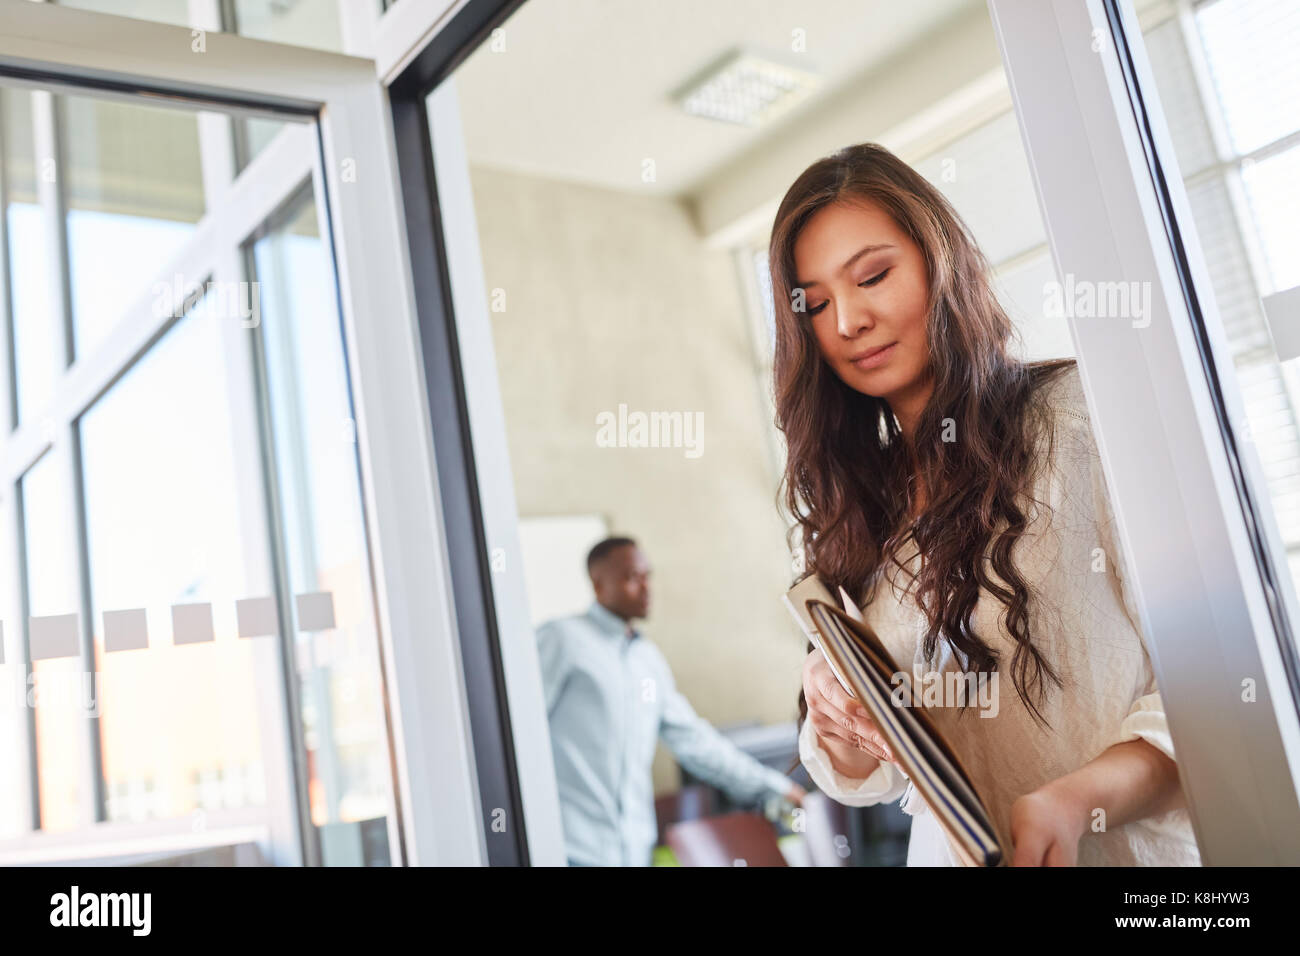 Asian woman as trainee or student in university Stock Photo